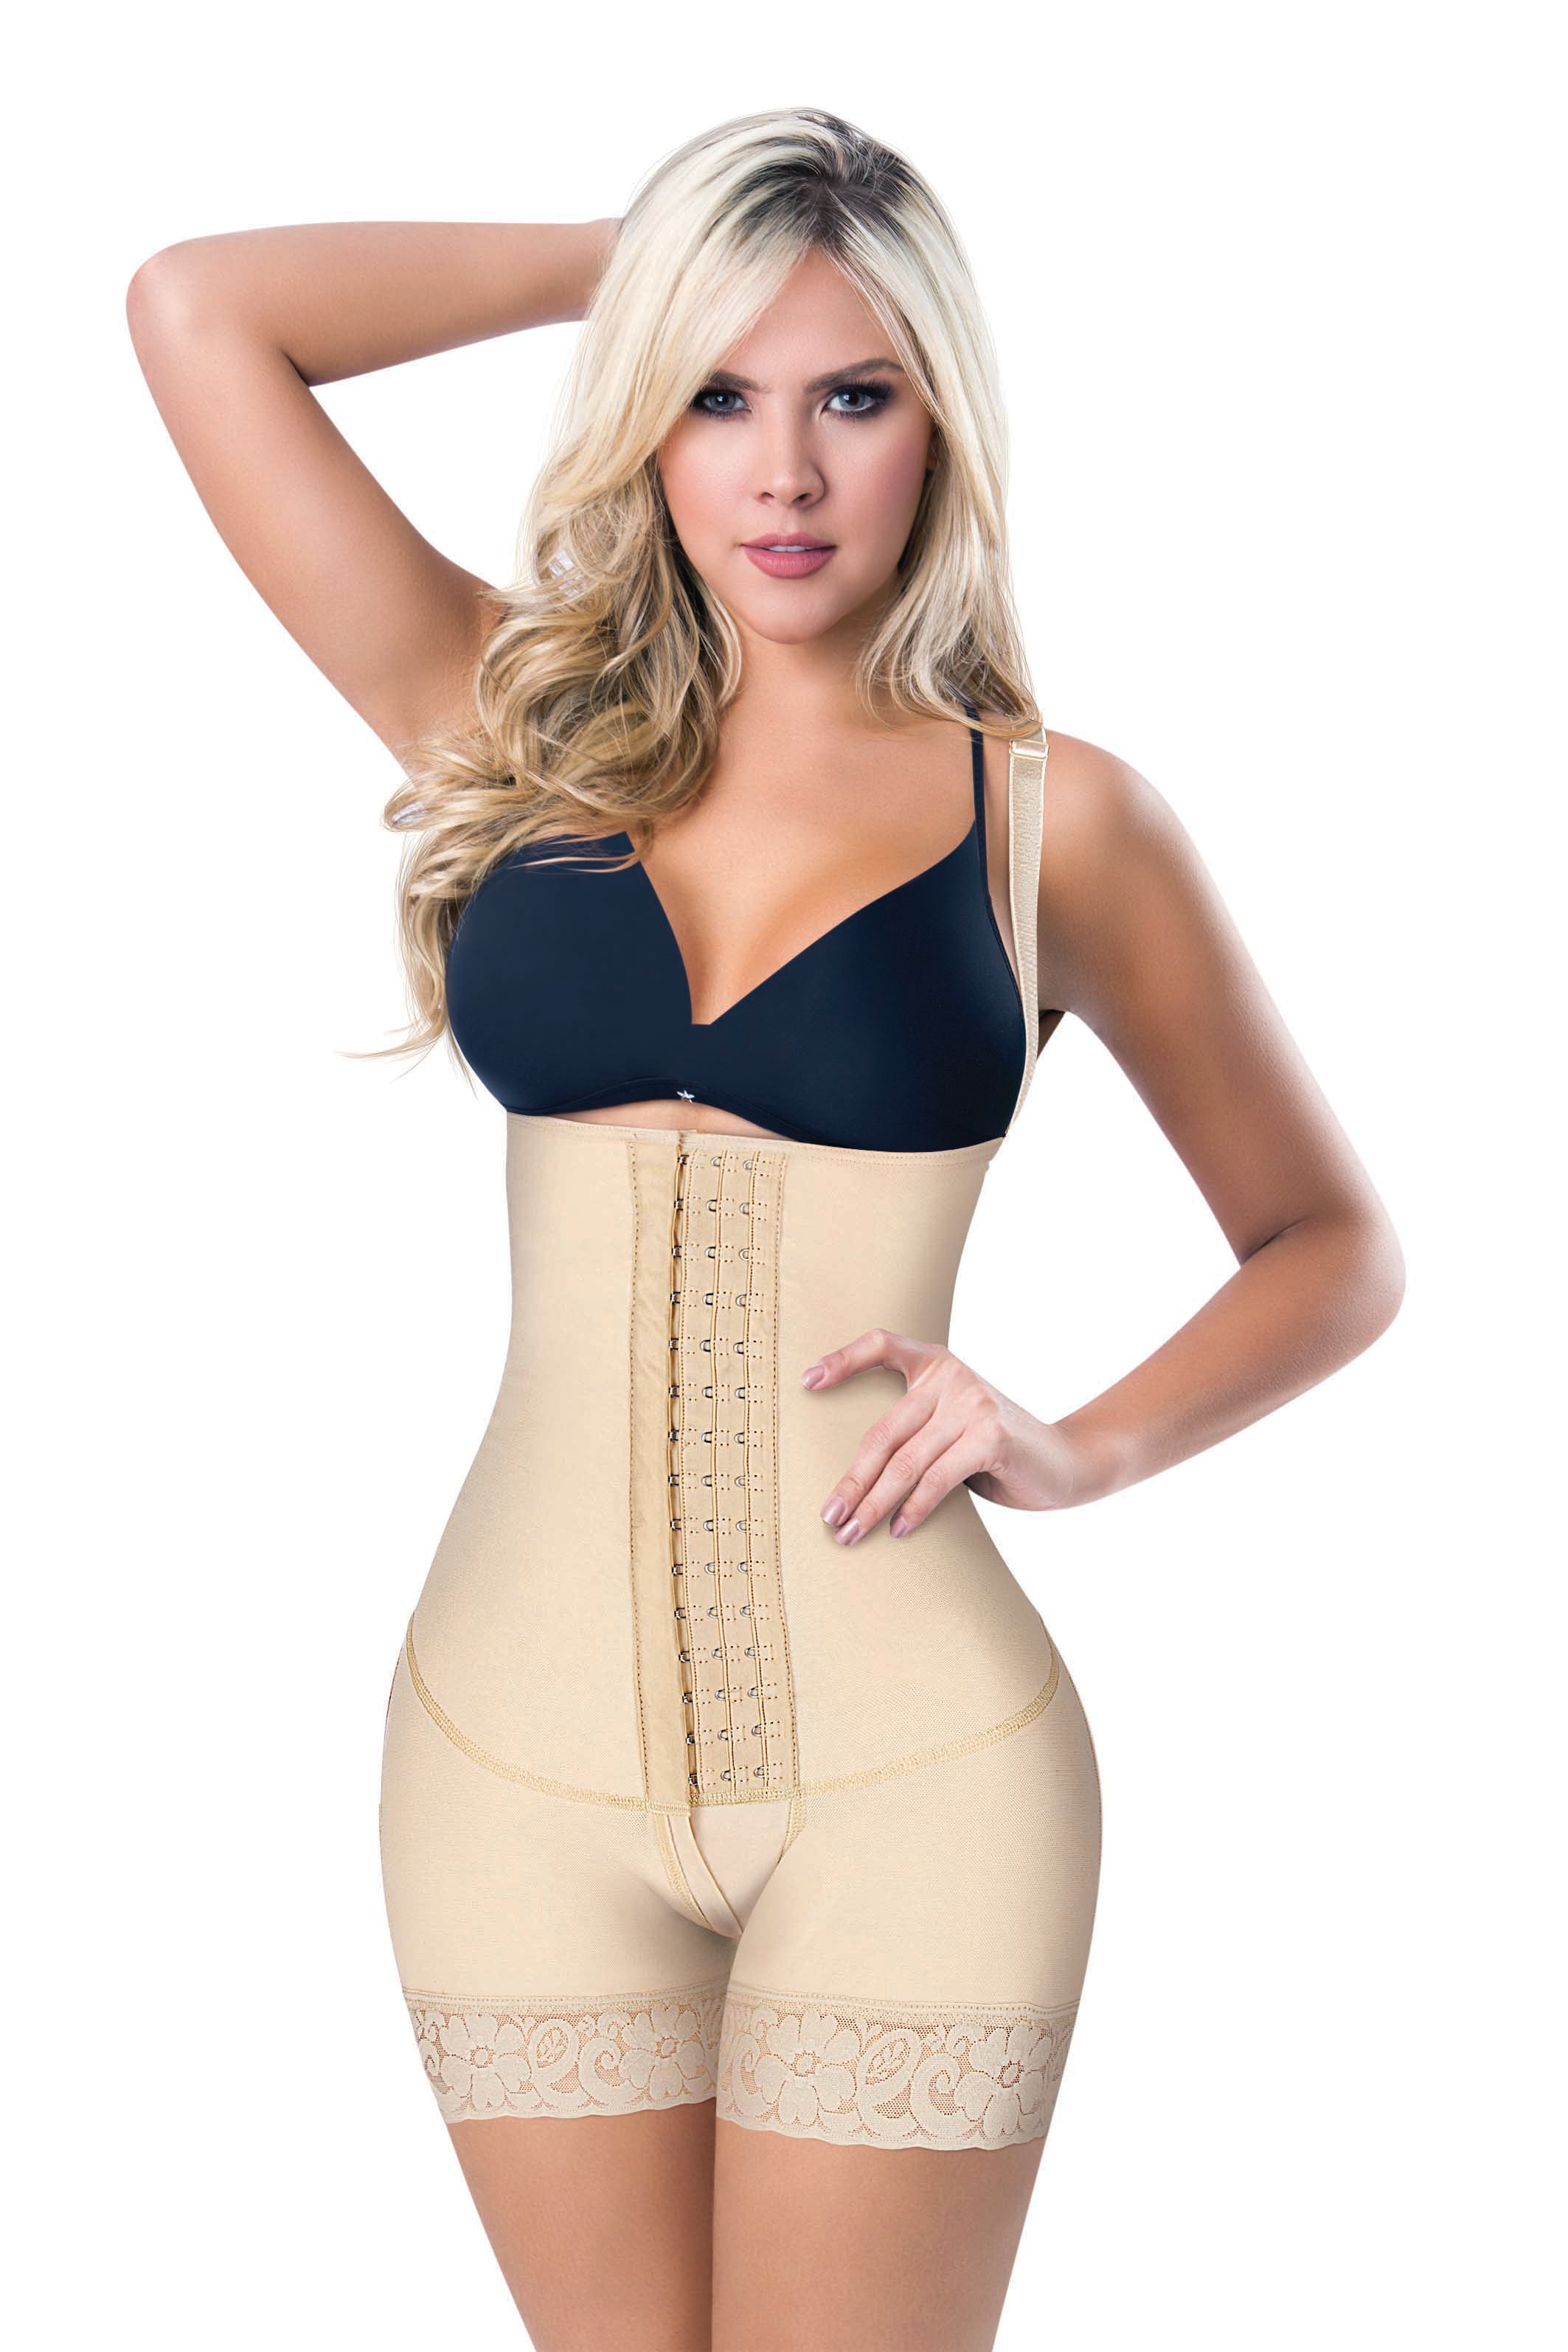 Colombian Latex Women Faja Body Shaper With Tummy Control, Buttocks Control  And Weight Loss Faja Gaine From Vikey18, $34.86